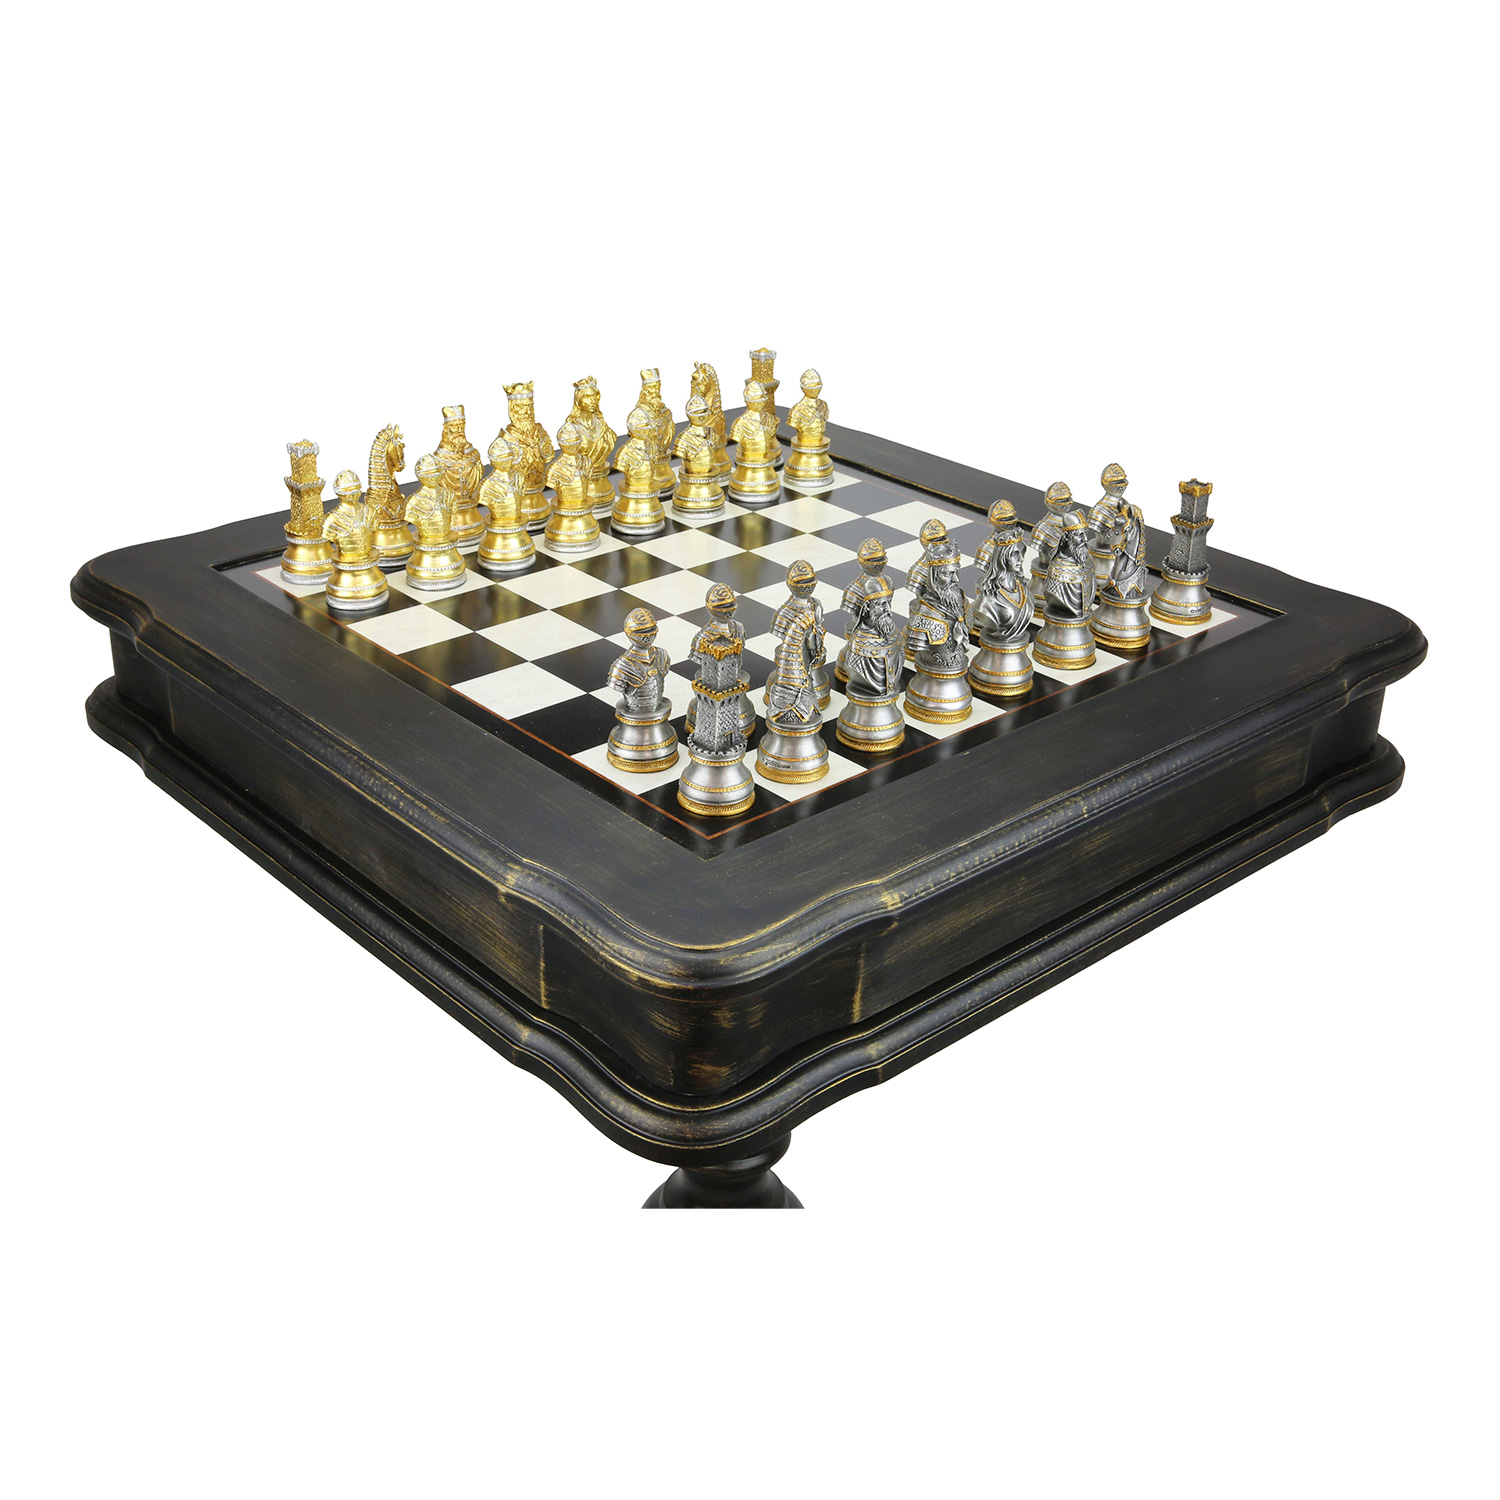 Exclusive handmade chess set Medieval 600140261 (gold/silver